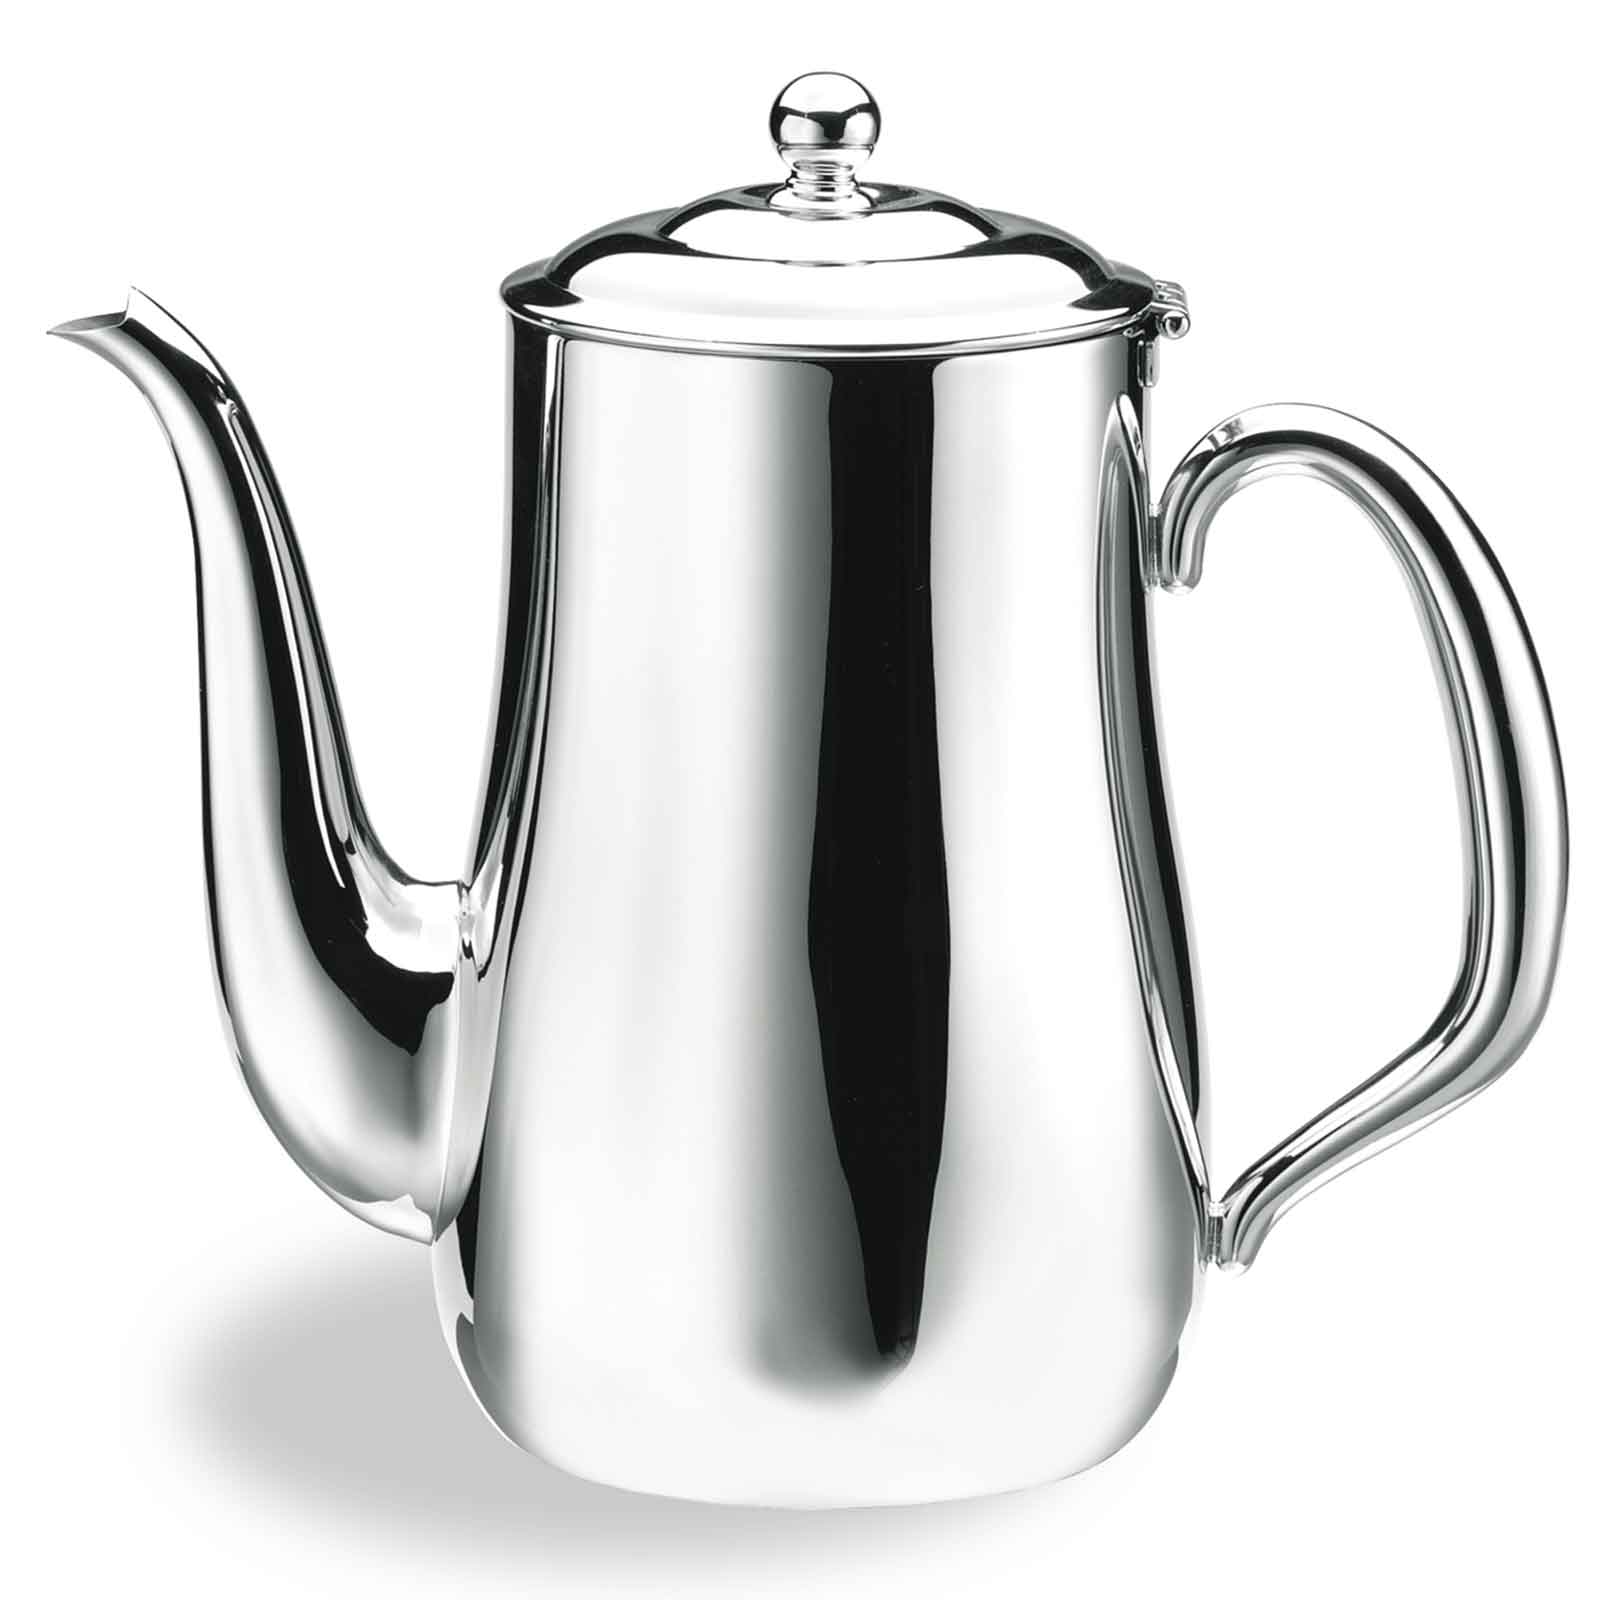 Walco Stainless CX511 Coffee Pot/Teapot, Stainless Steel, Holloware